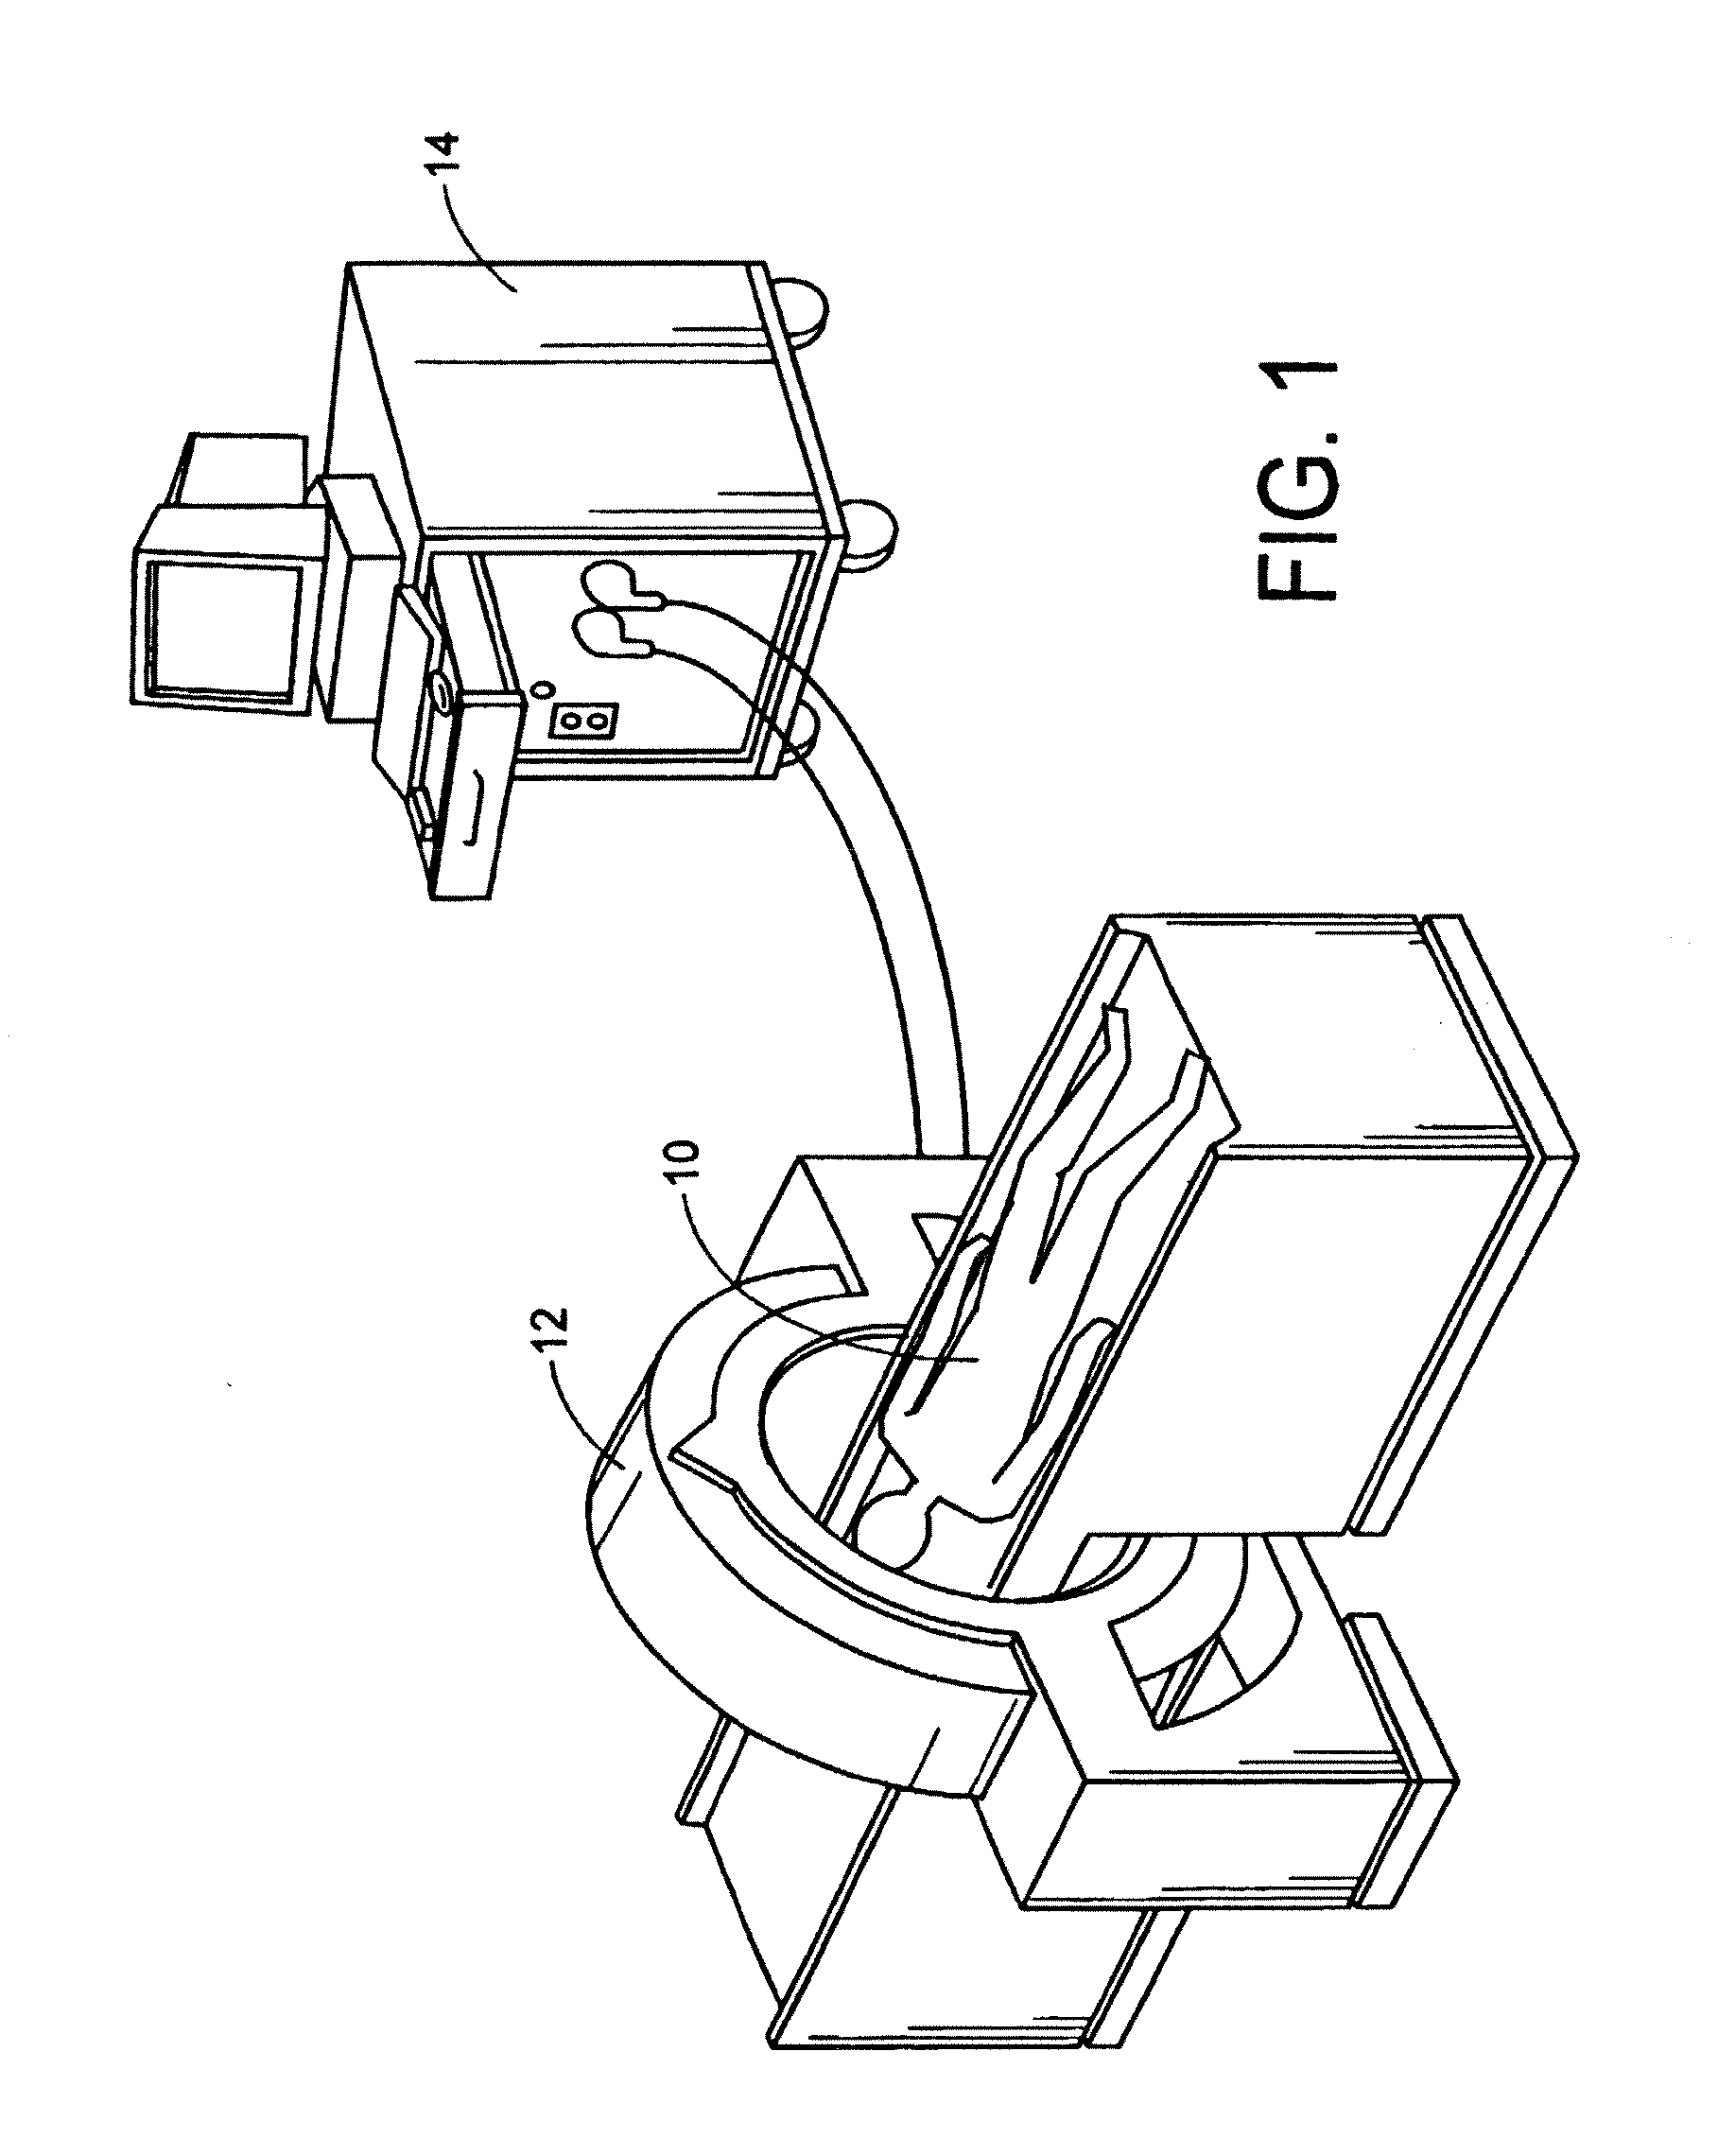 Producing a three dimensional model of an implant